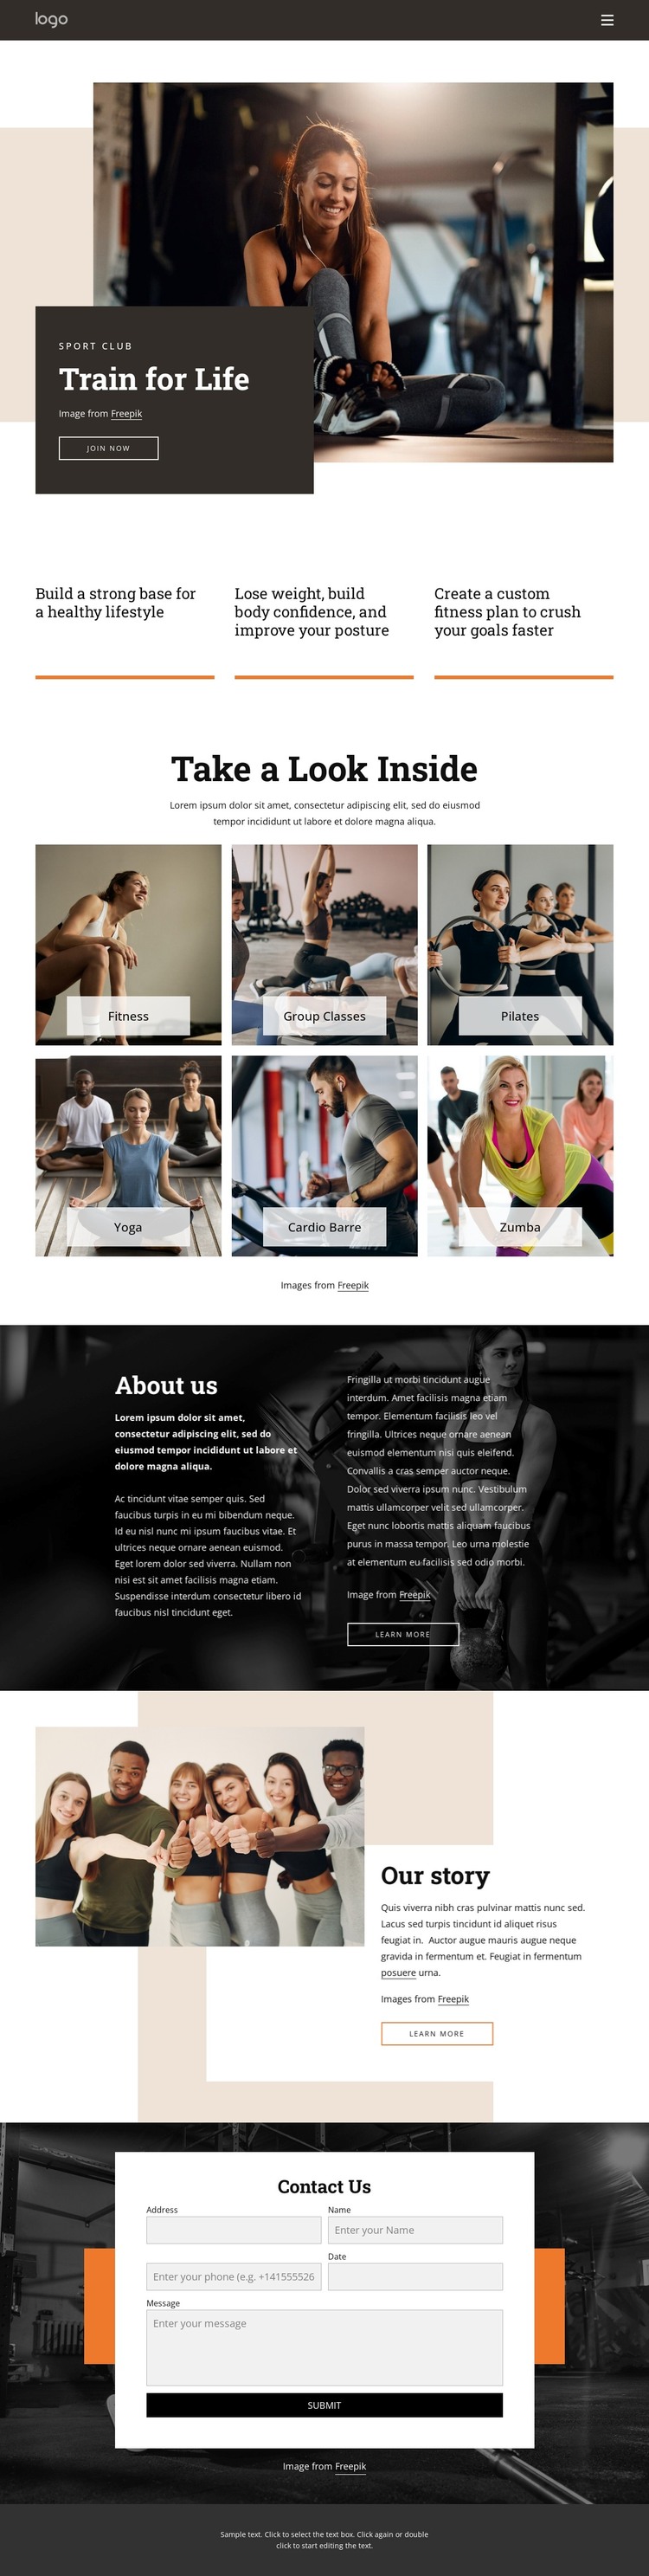 Get moving with our range of classes WordPress Theme